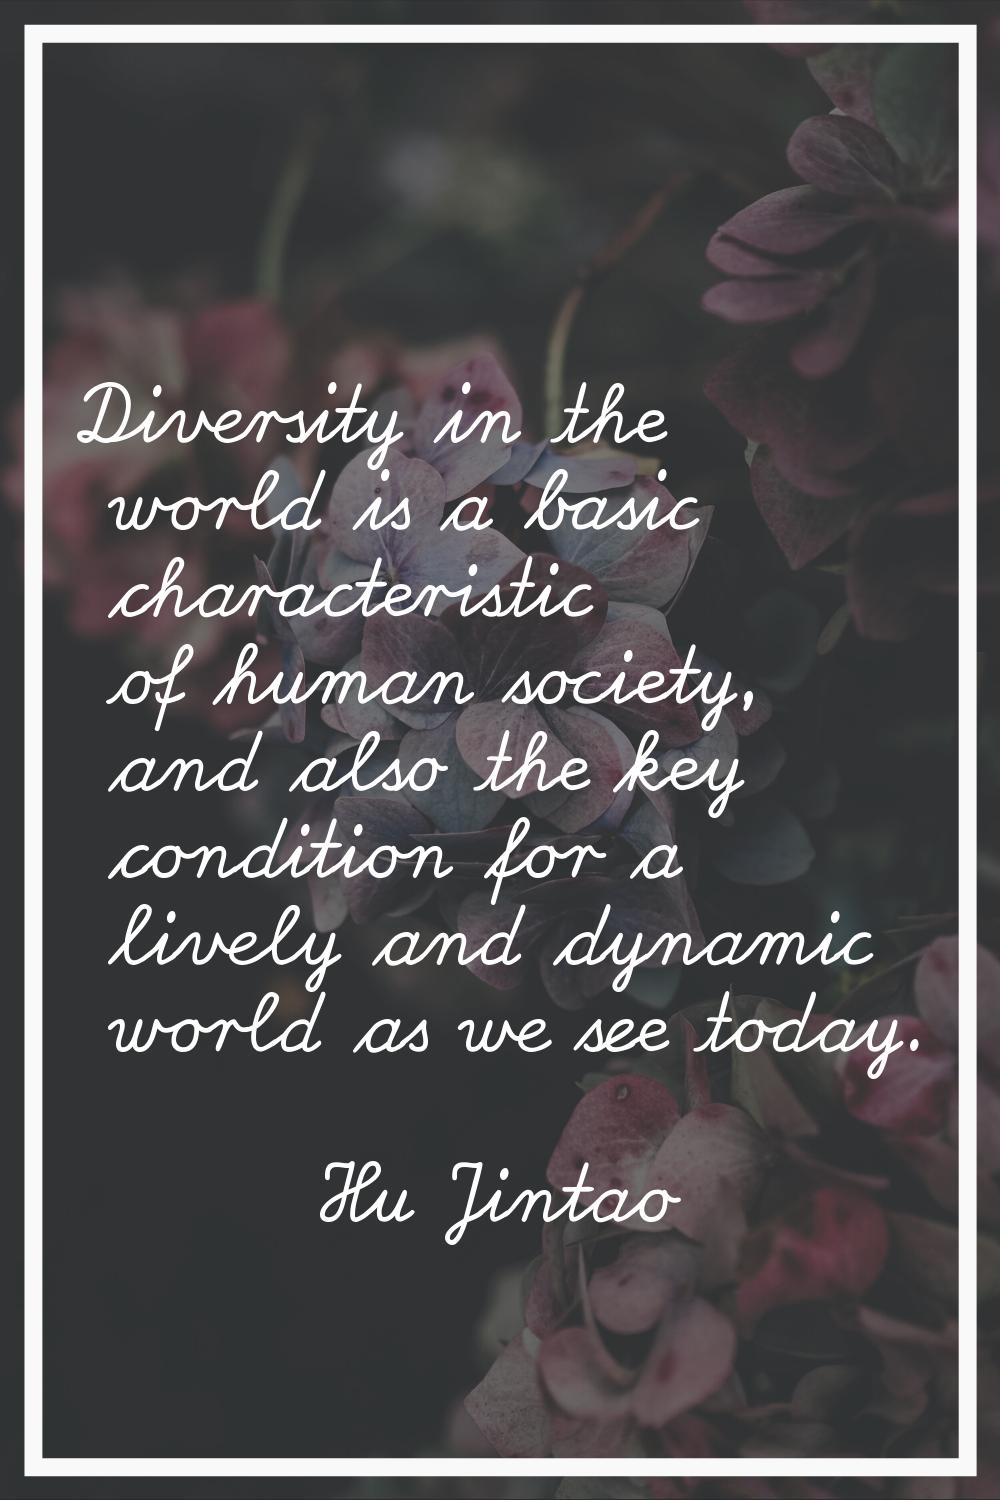 Diversity in the world is a basic characteristic of human society, and also the key condition for a